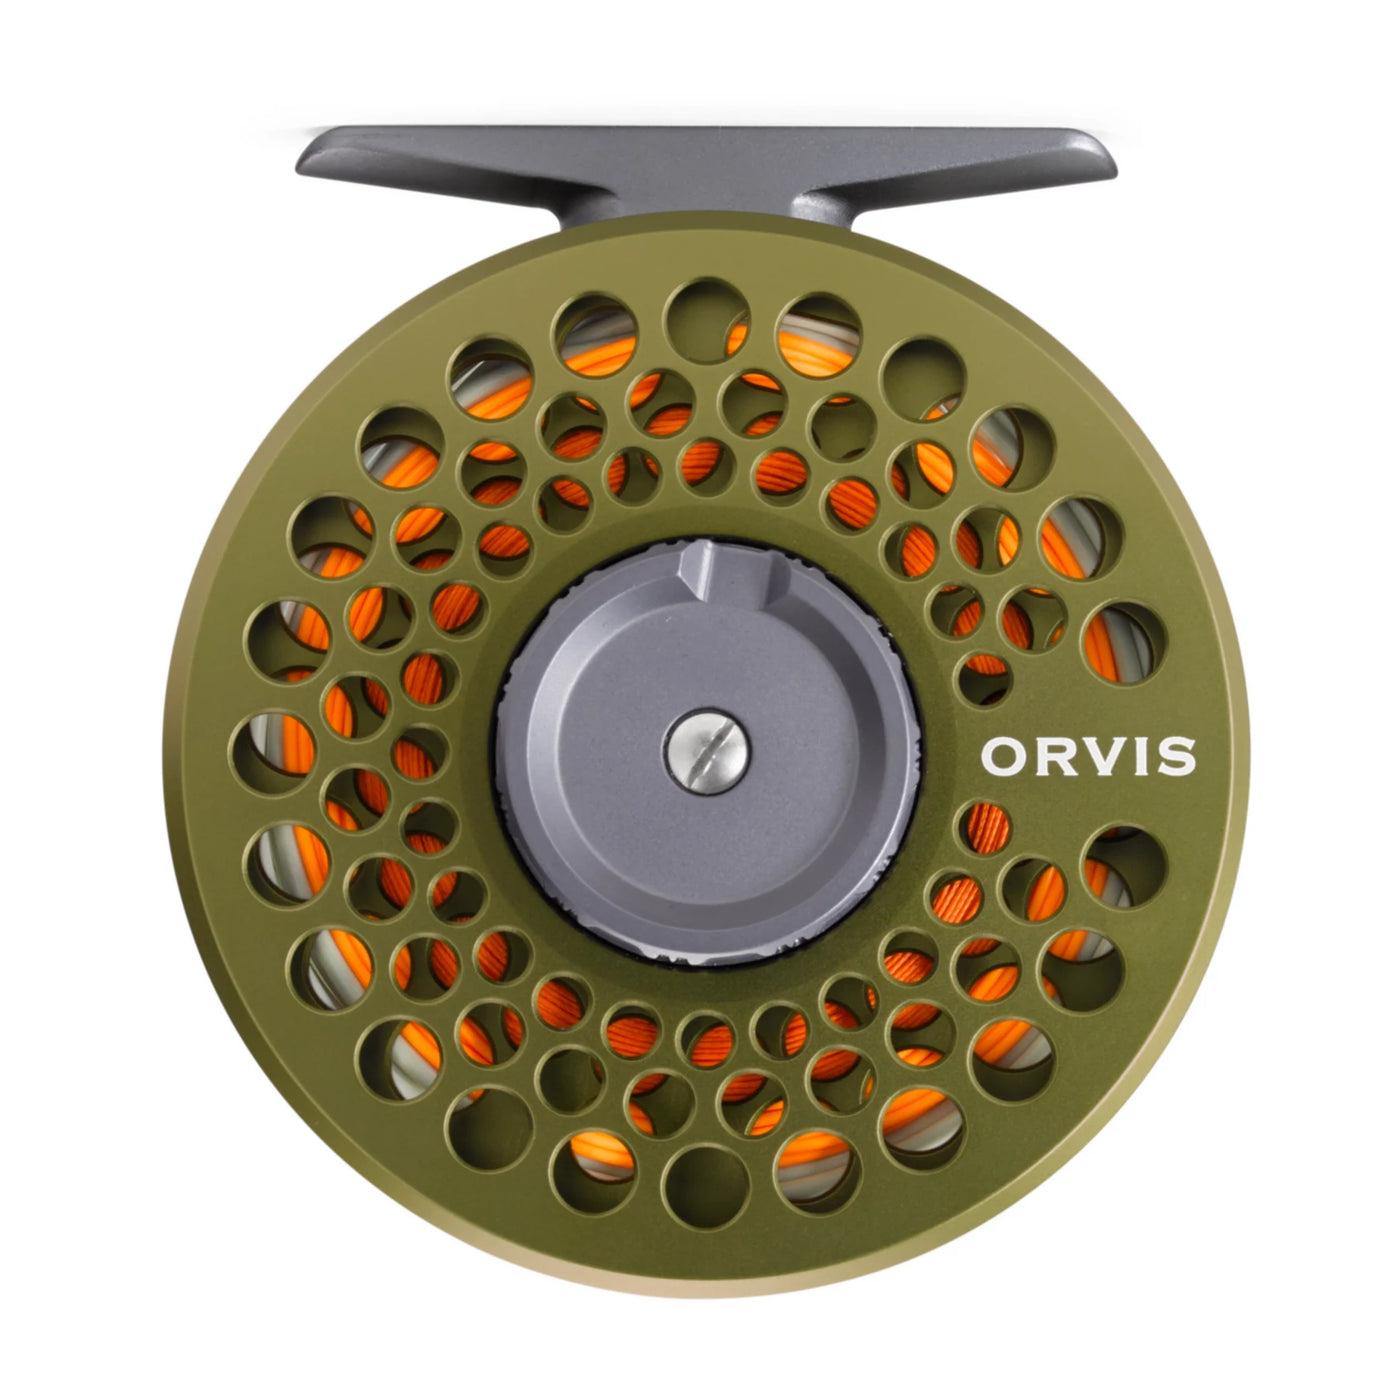 Orvis Clearwater Large Arbor Fly Reels | Aussie Angler